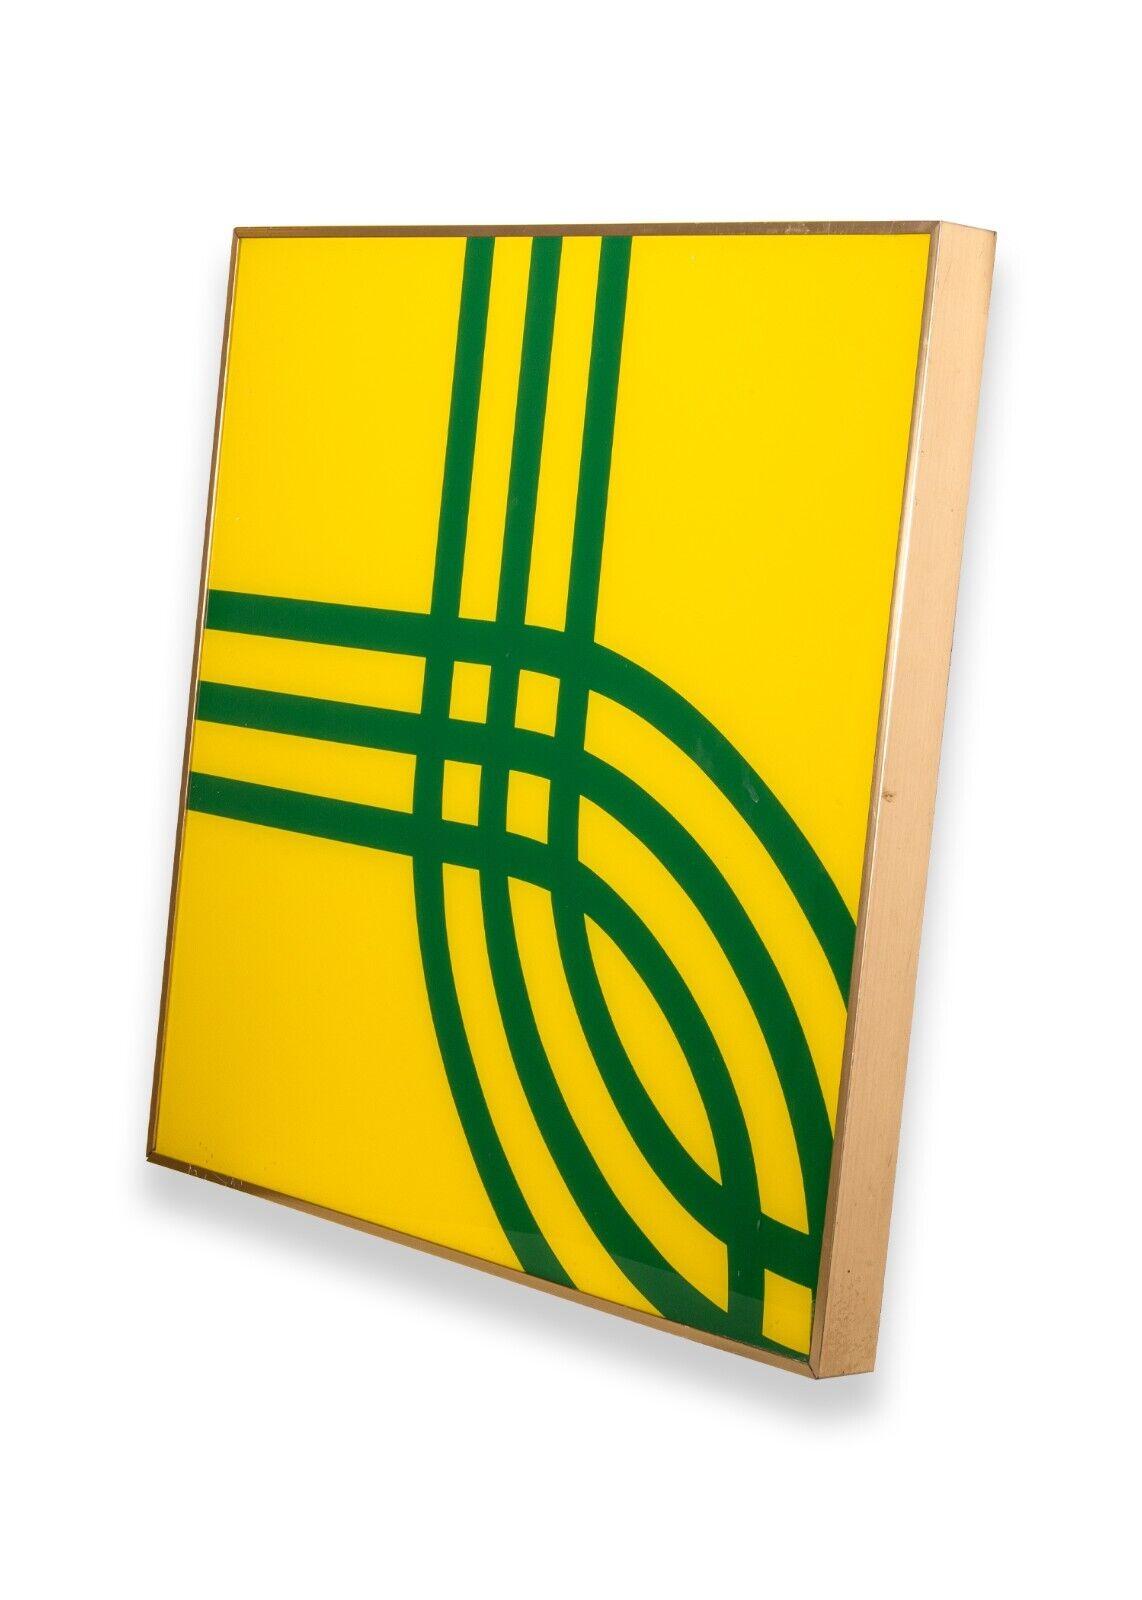 American Vintage Modern Op Art Abstract Yellow Green Lines by Turner MFG Co Chicago 1970s